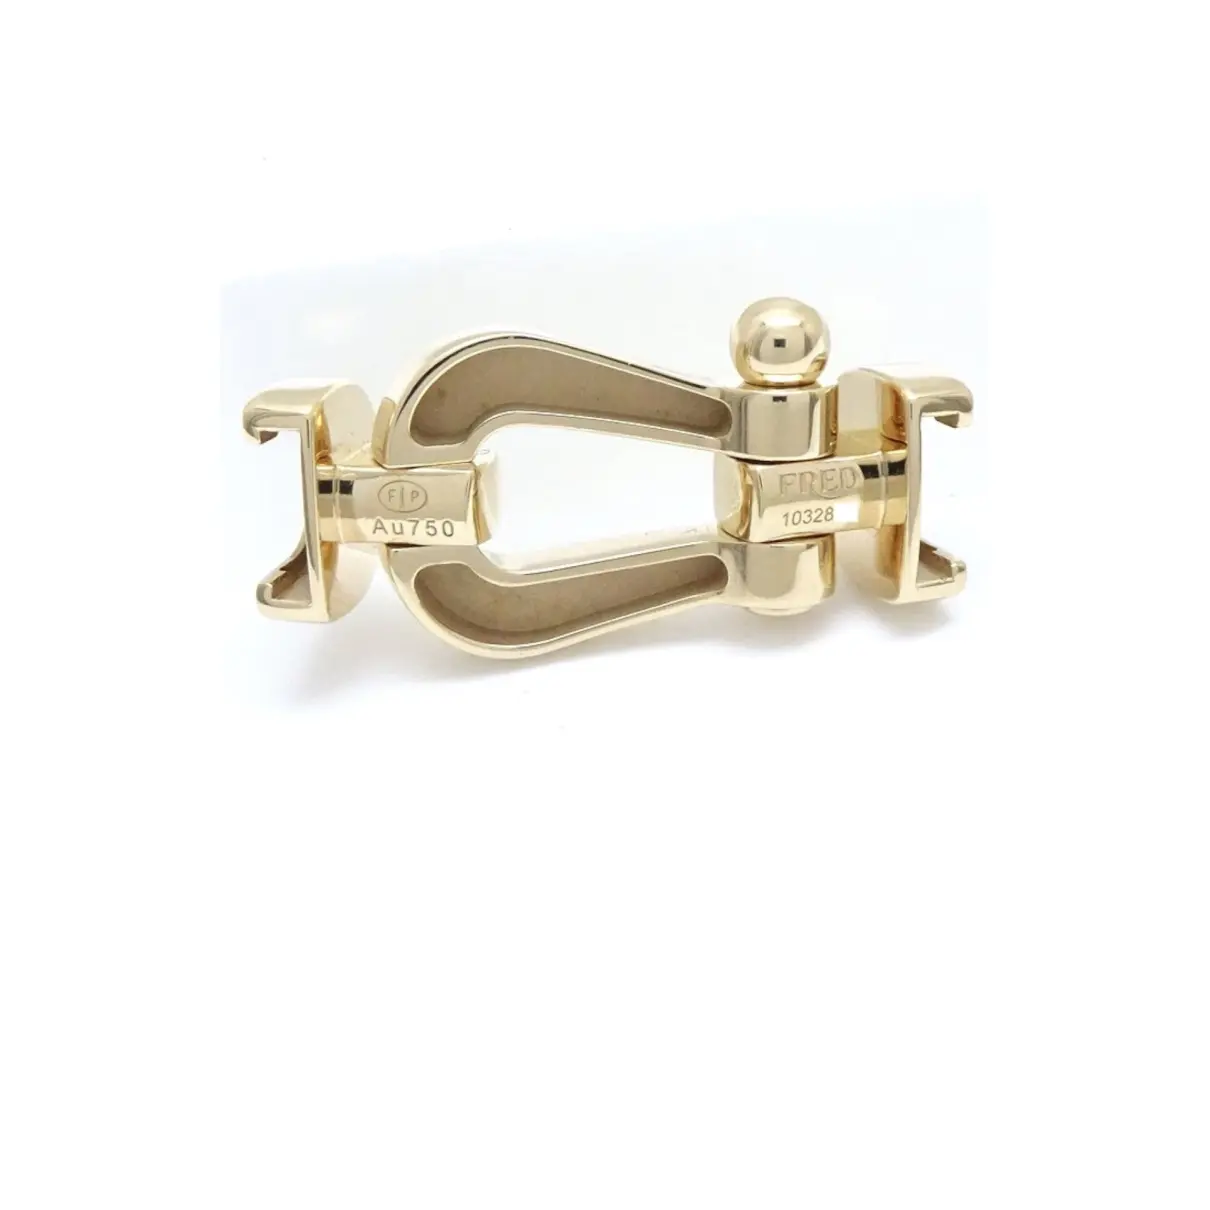 Buy Fred Force 10 yellow gold bracelet online